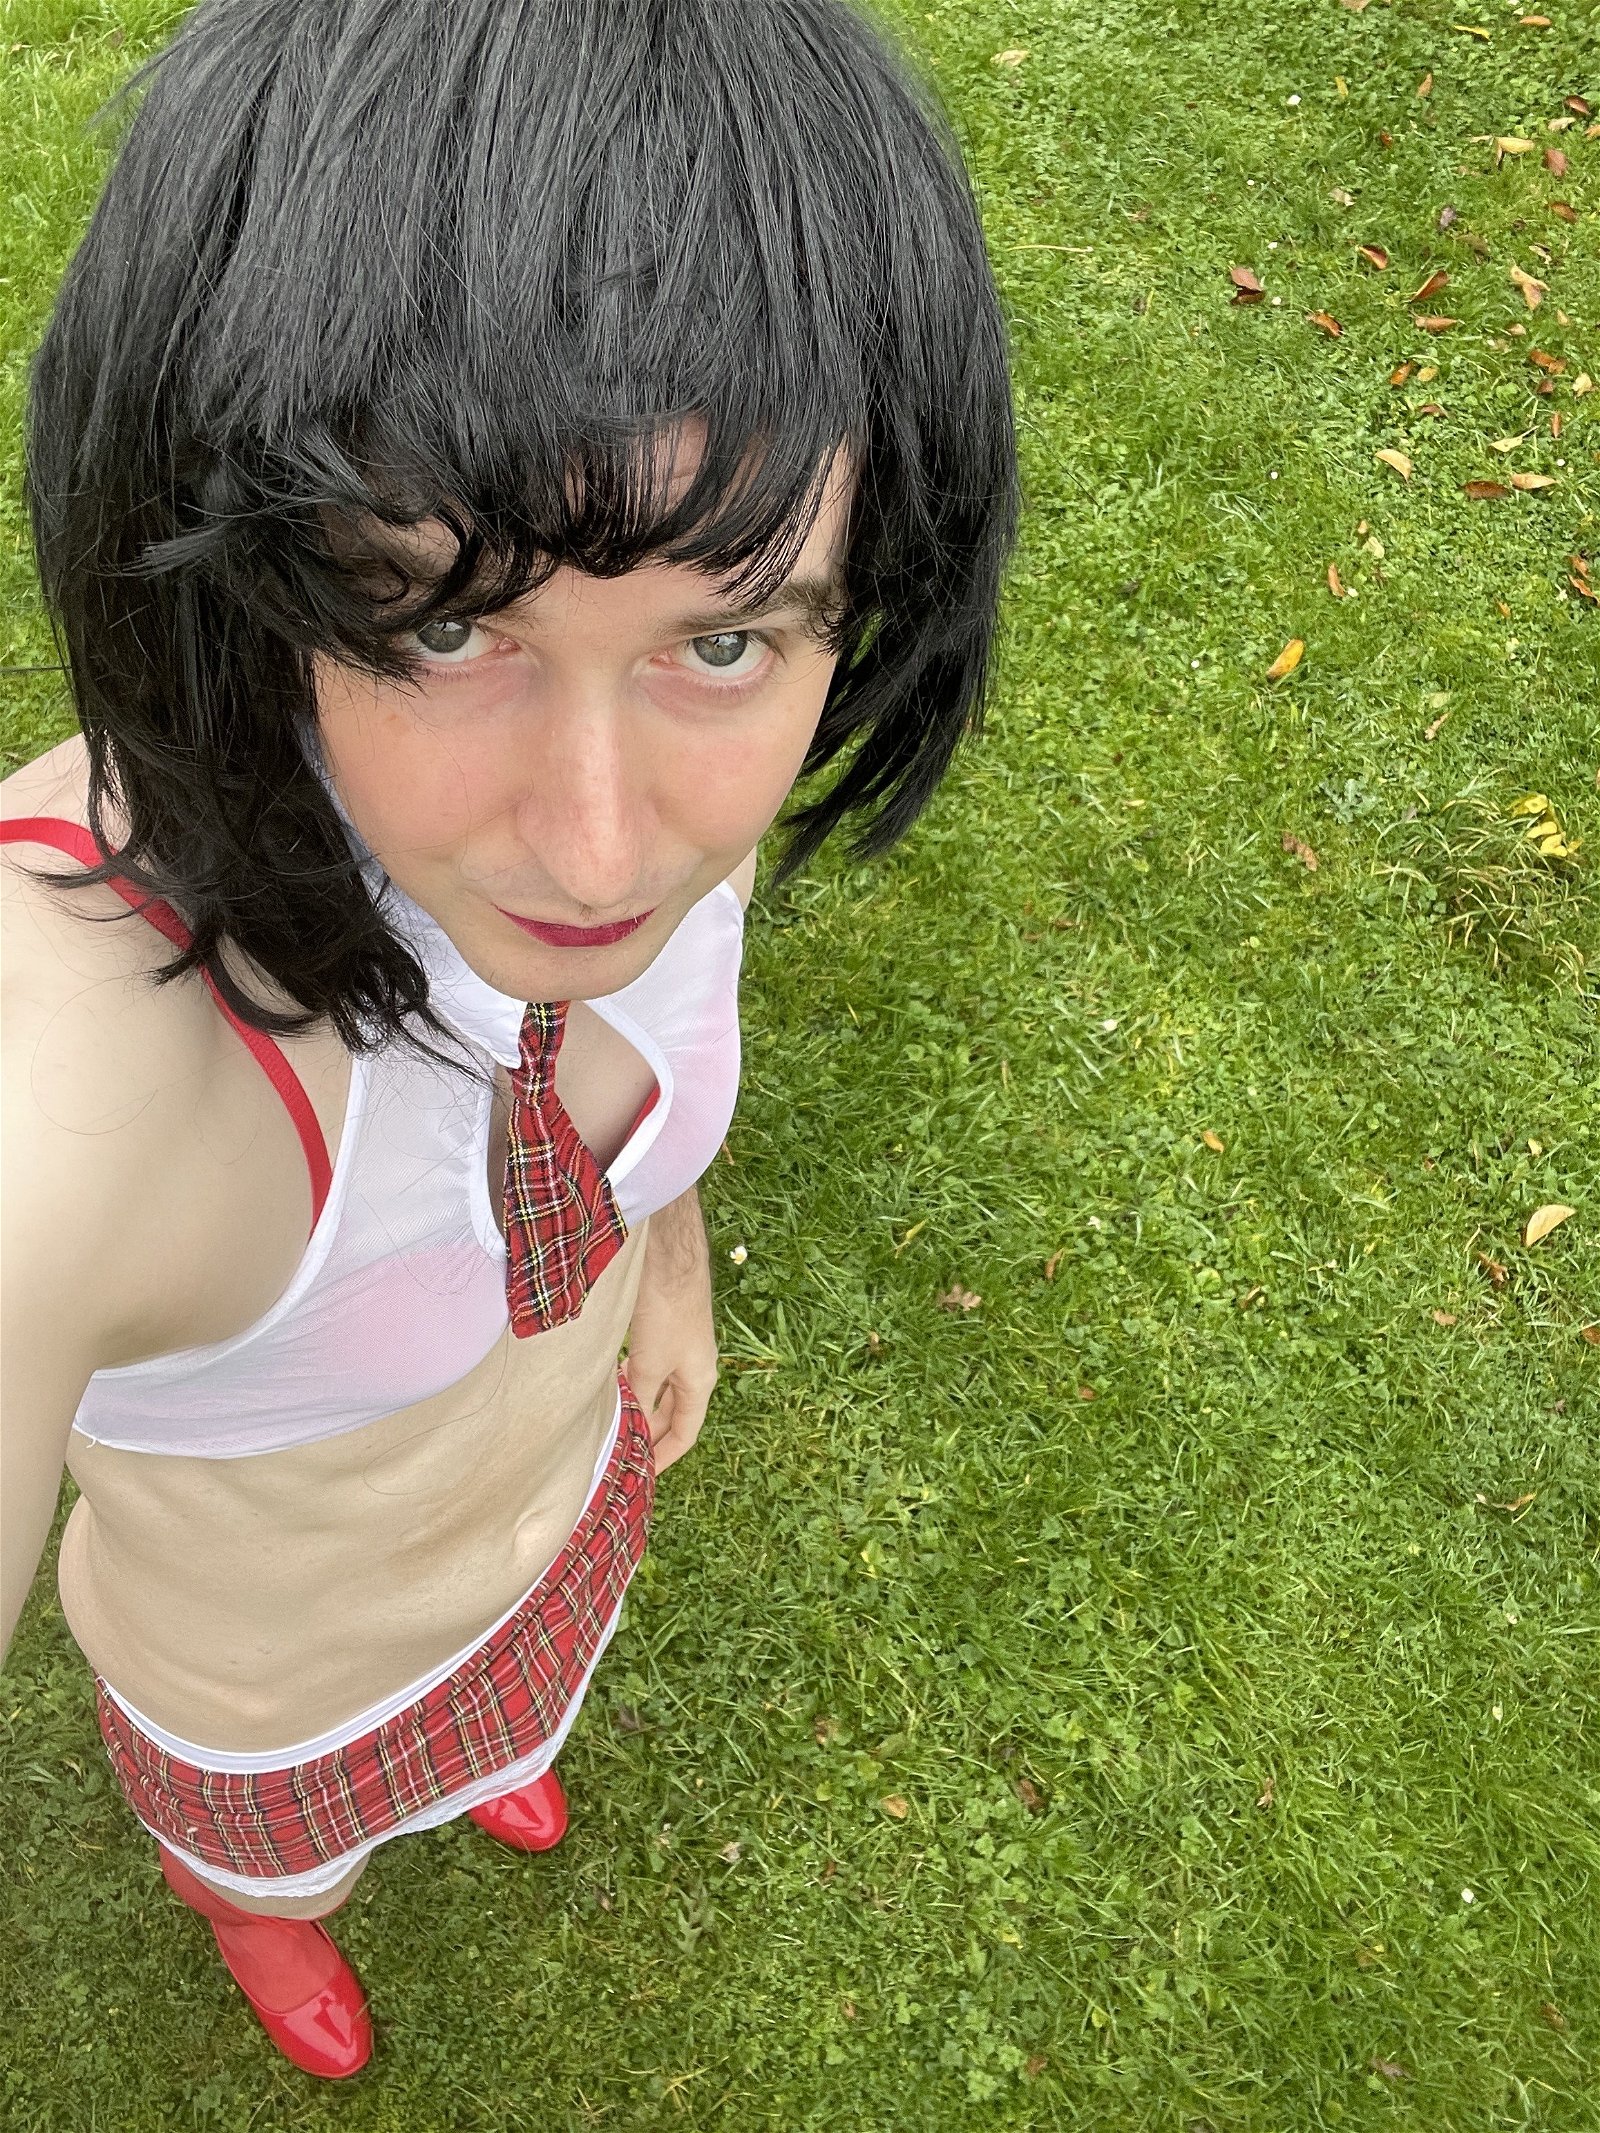 Watch the Photo by sluttxoxx with the username @sluttxoxx, posted on December 23, 2021. The post is about the topic sissy slut.